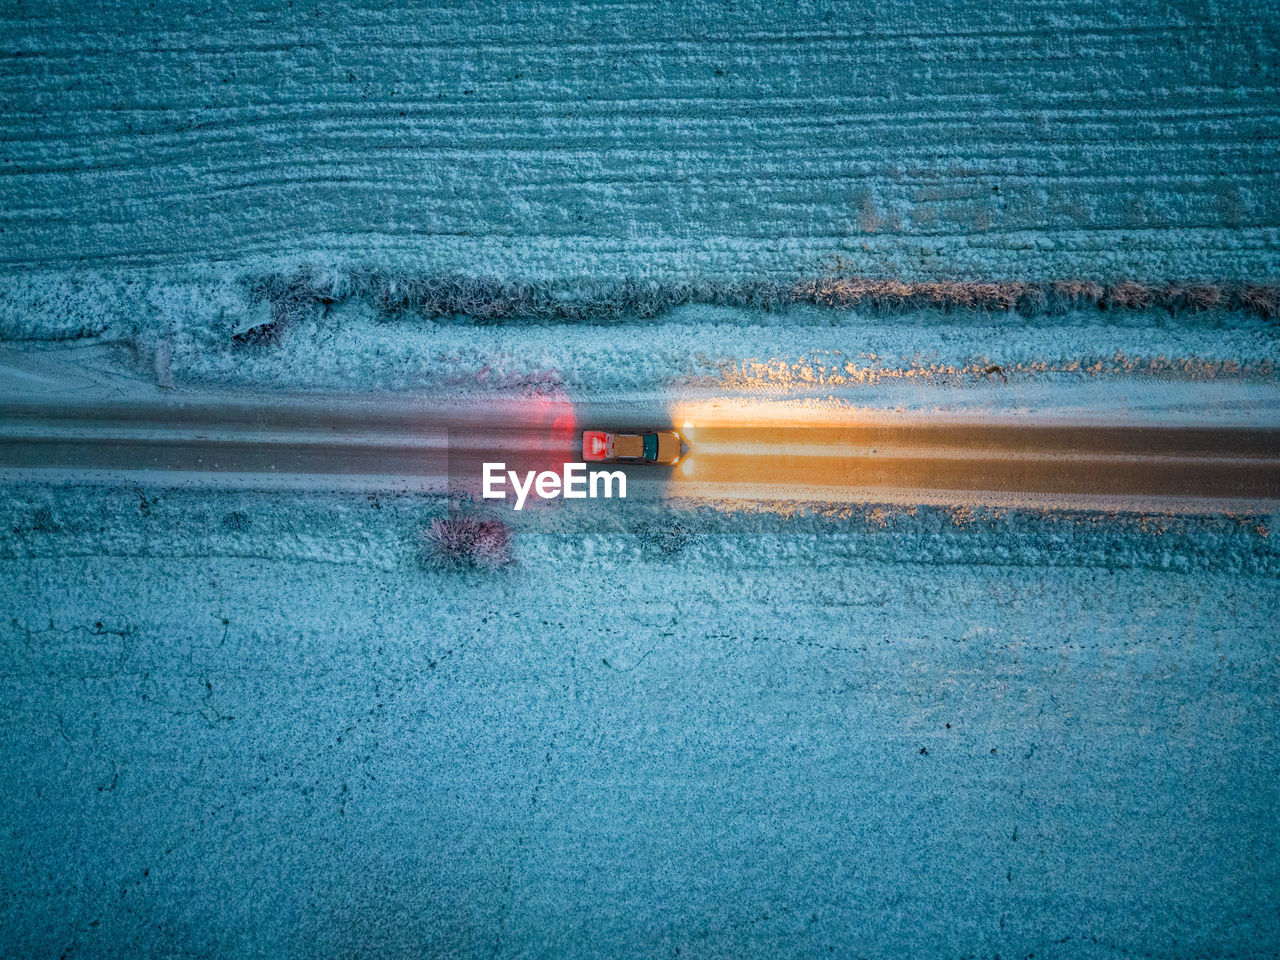 Aerial view of a car driving through a forest at dusk in winter time. shot taken by a drone